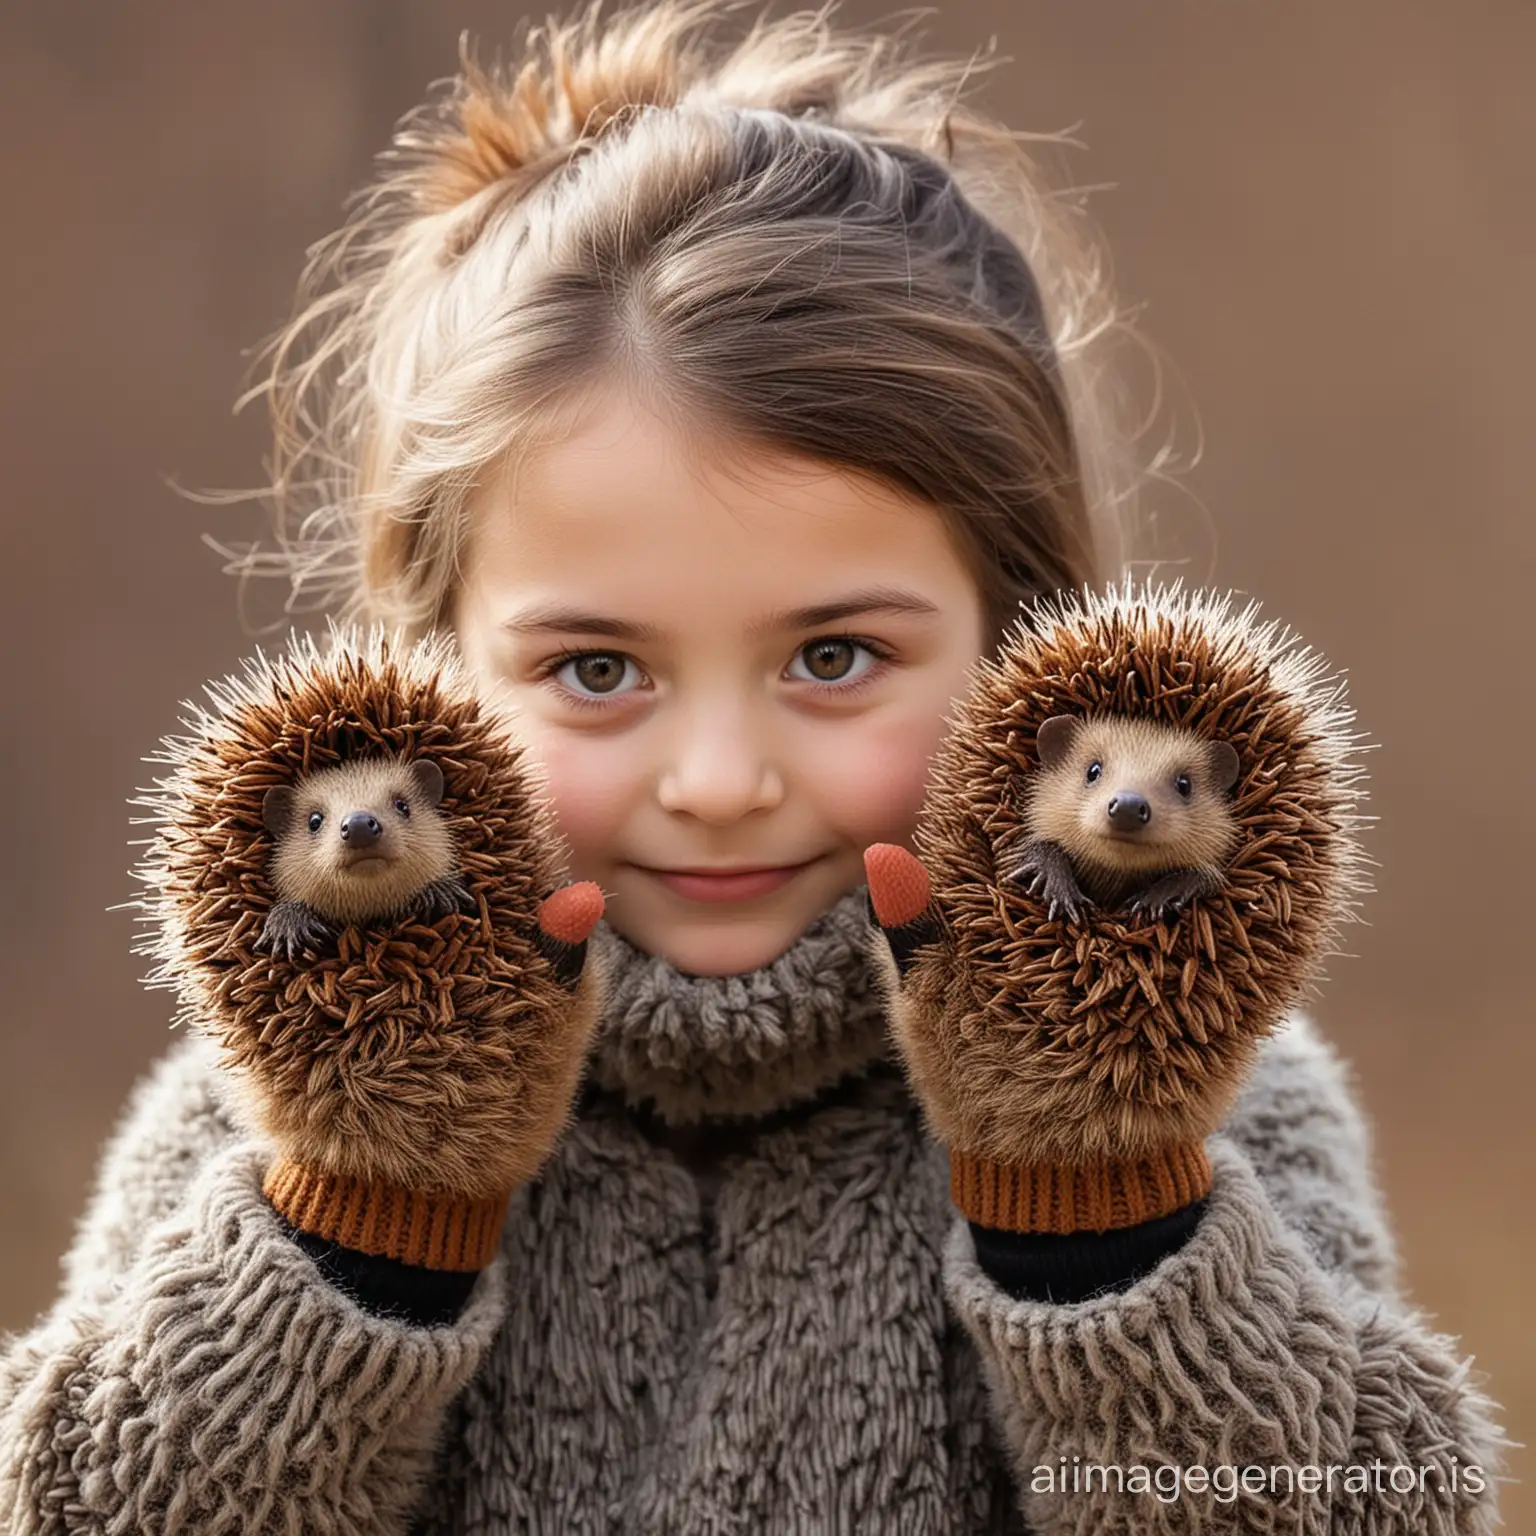 child wearing mittens made of real hedgehogs with needles